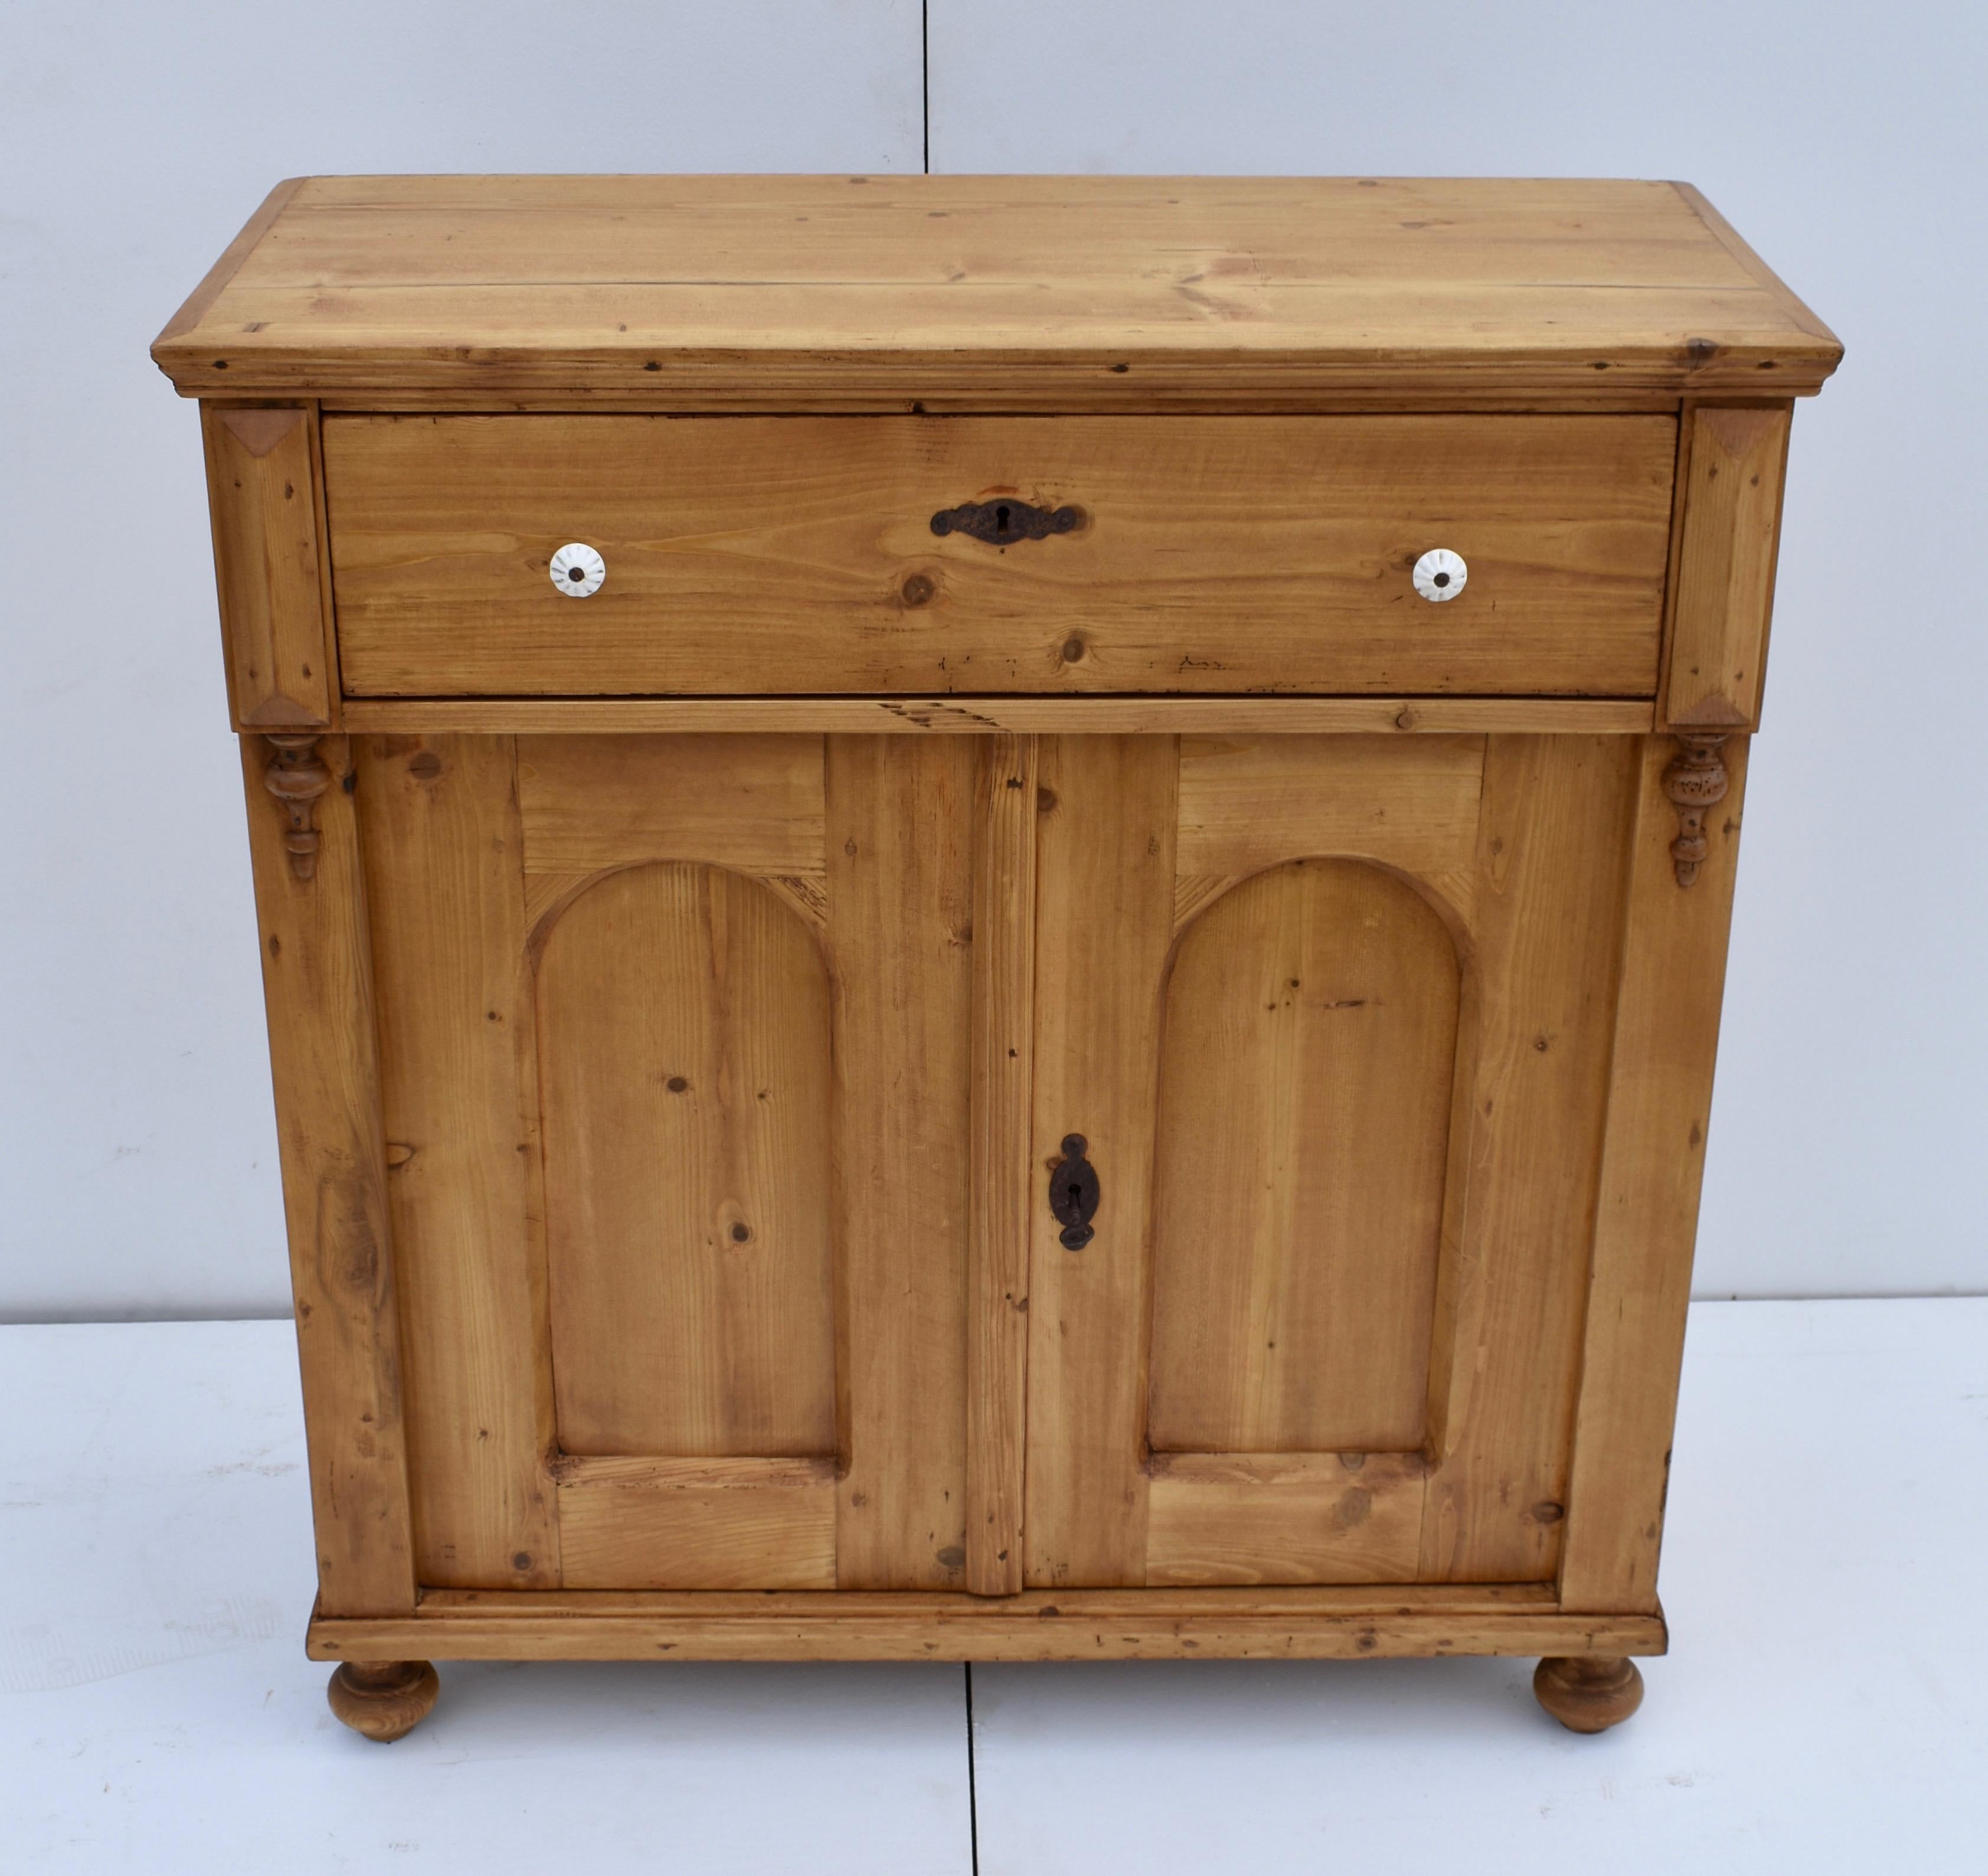 This is a pretty little pine two door dresser base with a versatile shallow profile. The top is trimmed with an ogee molding and sits above a single hand-cut dovetailed drawer with original ceramic knobs. The arched-paneled doors open over ninety